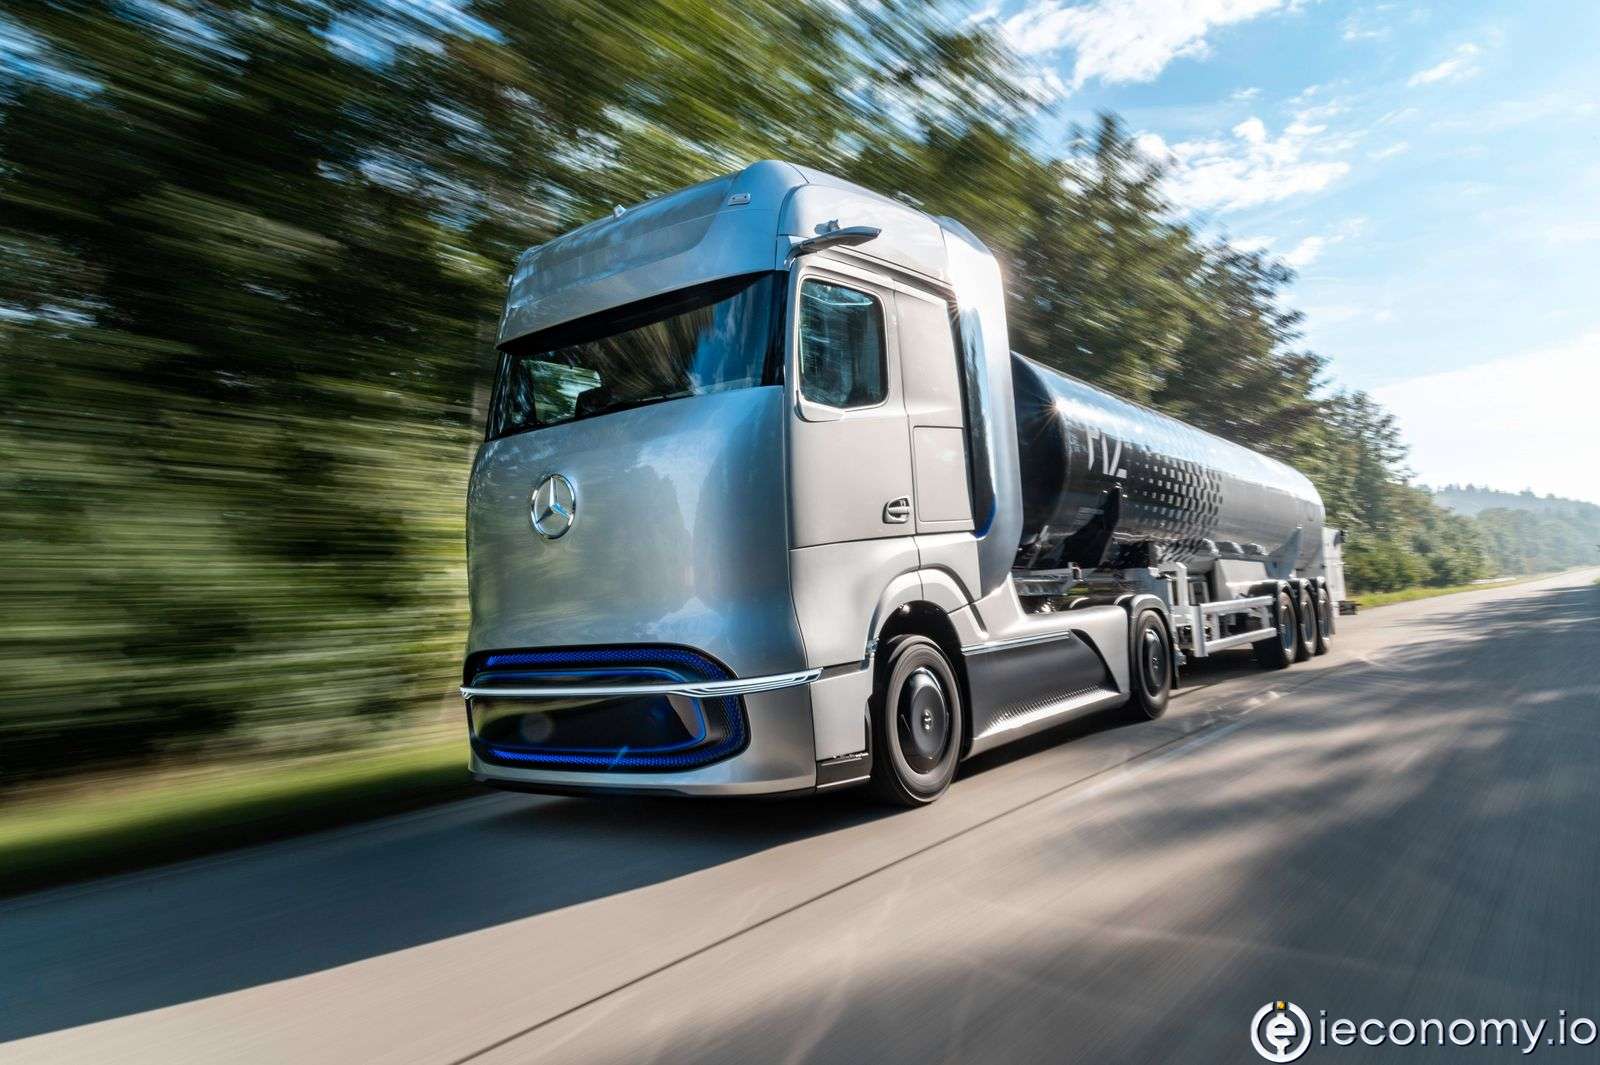 Daimler Truck will be released into entrepreneurial independence